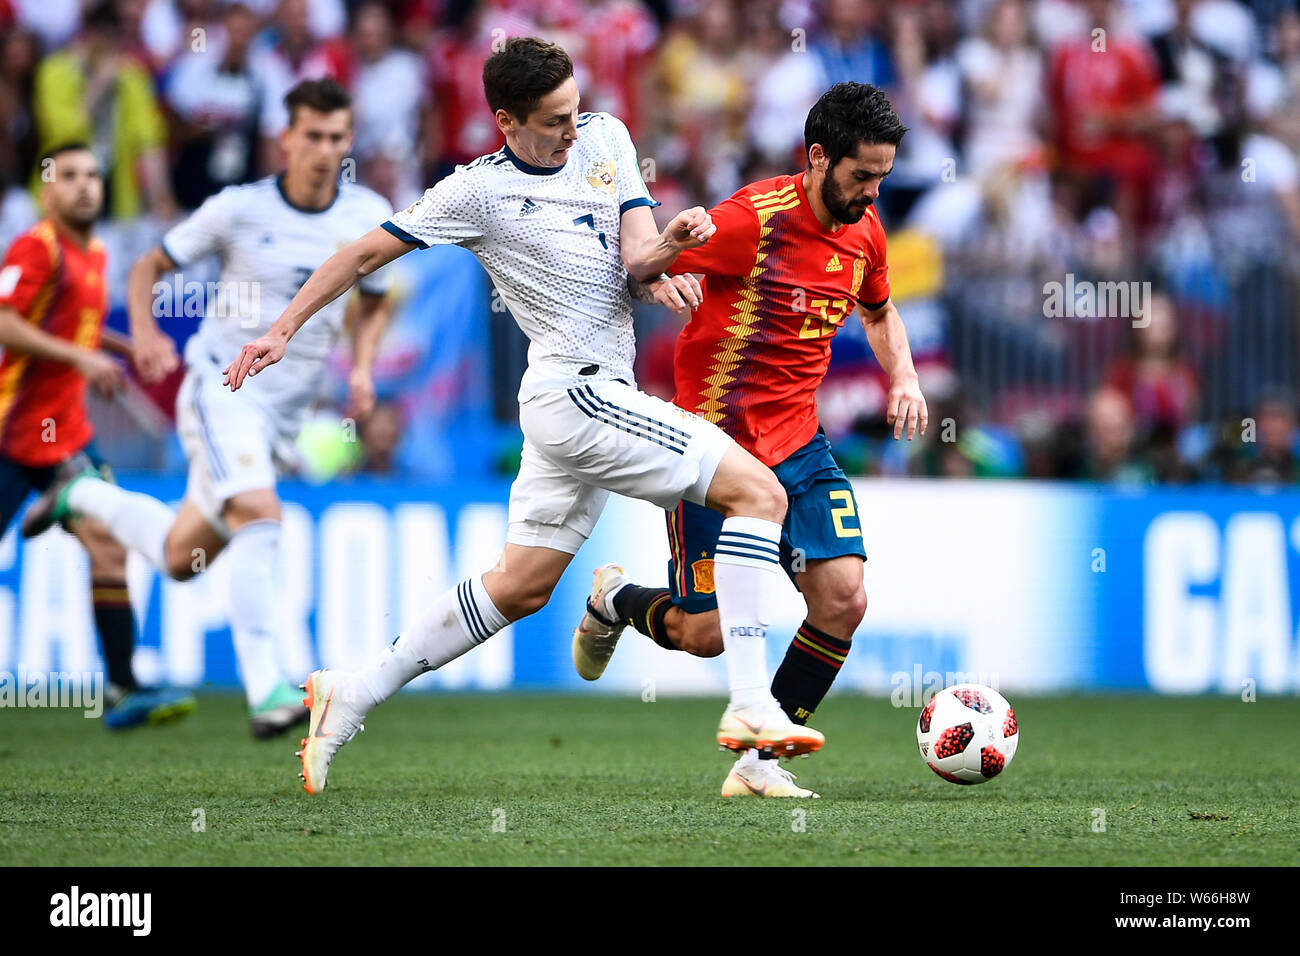 Daler Kuzyayev of Russia, left, challenges Isco of Spain in their Round of 16 match during the 2018 FIFA World Cup in Moscow, Russia, 1 July 2018.   R Stock Photo